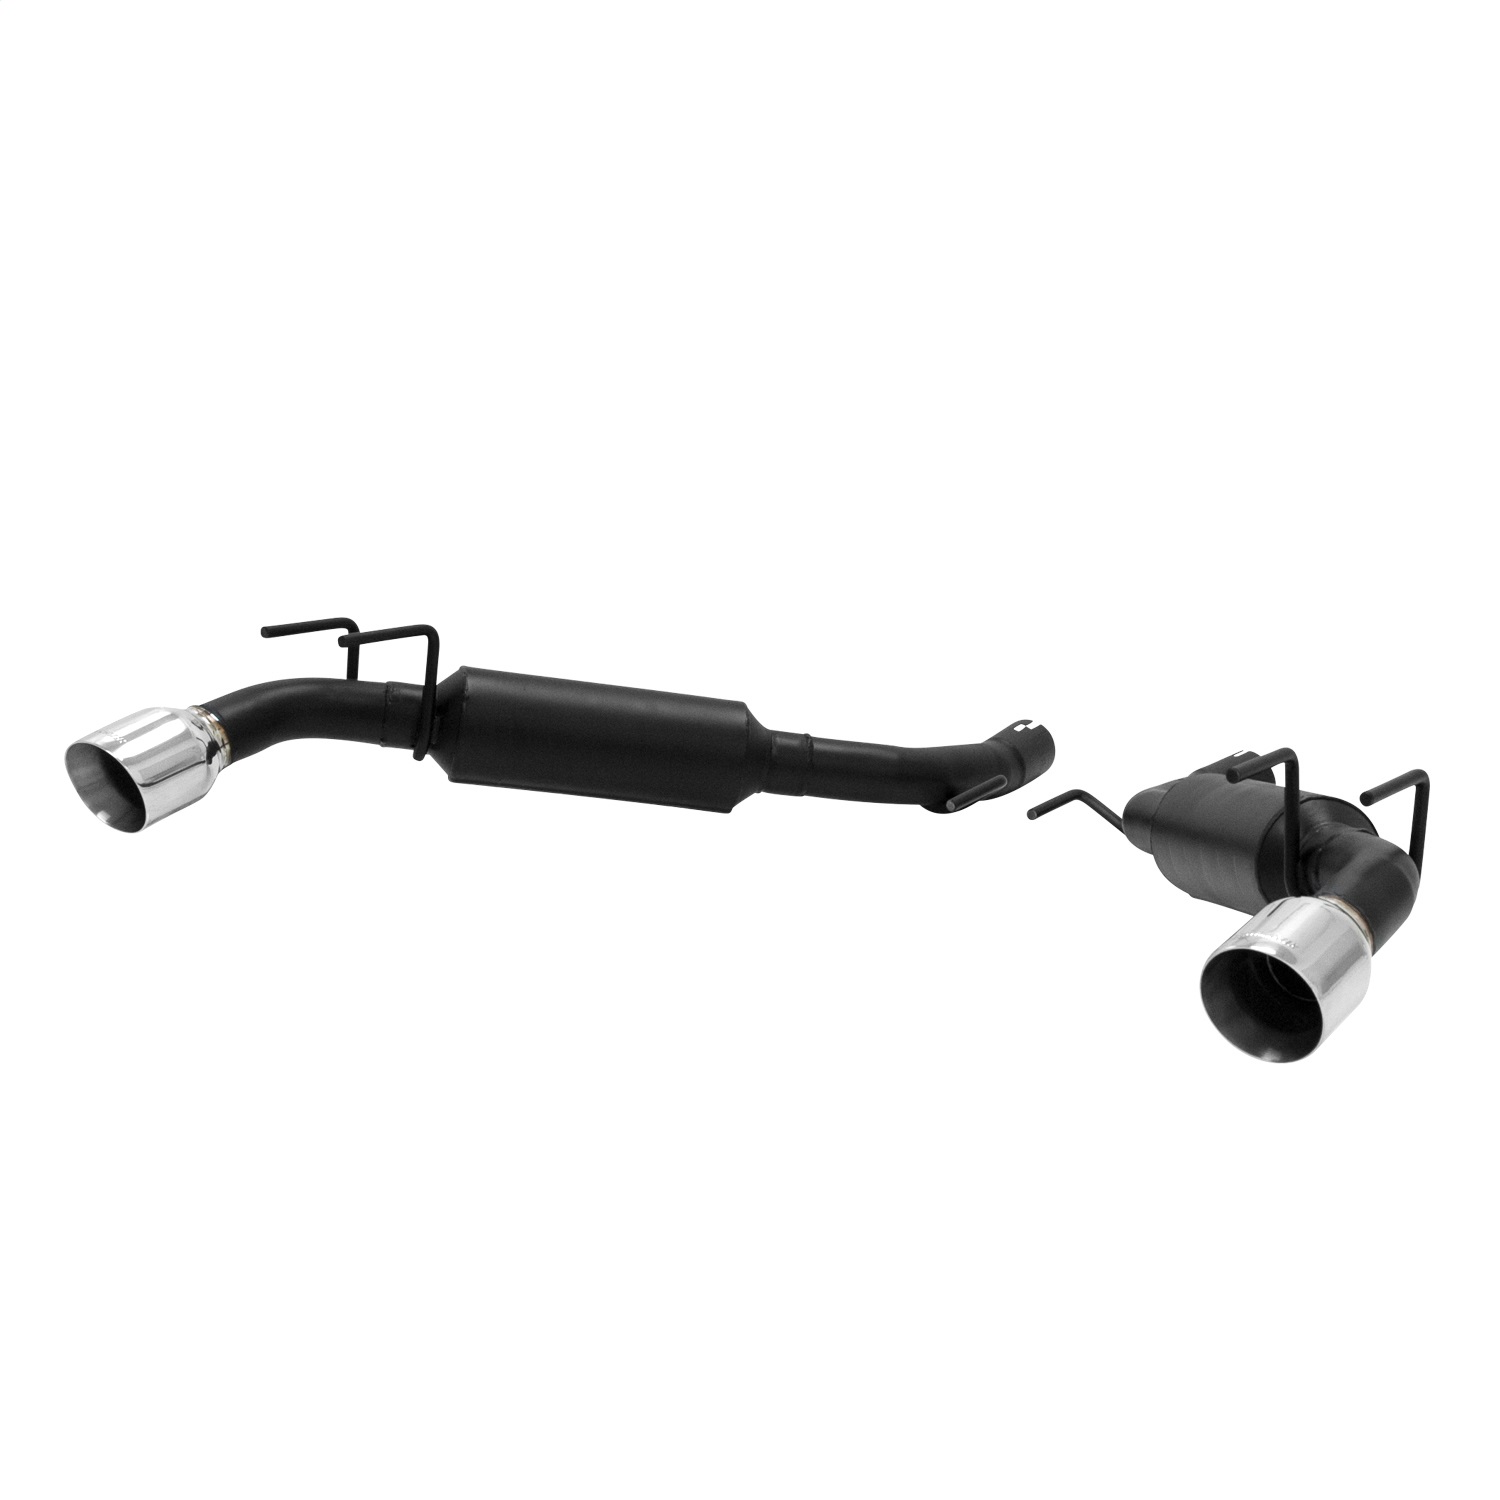 Flowmaster Flowmaster 817686 Outlaw Series Axle Back Exhaust System Fits 14 Camaro